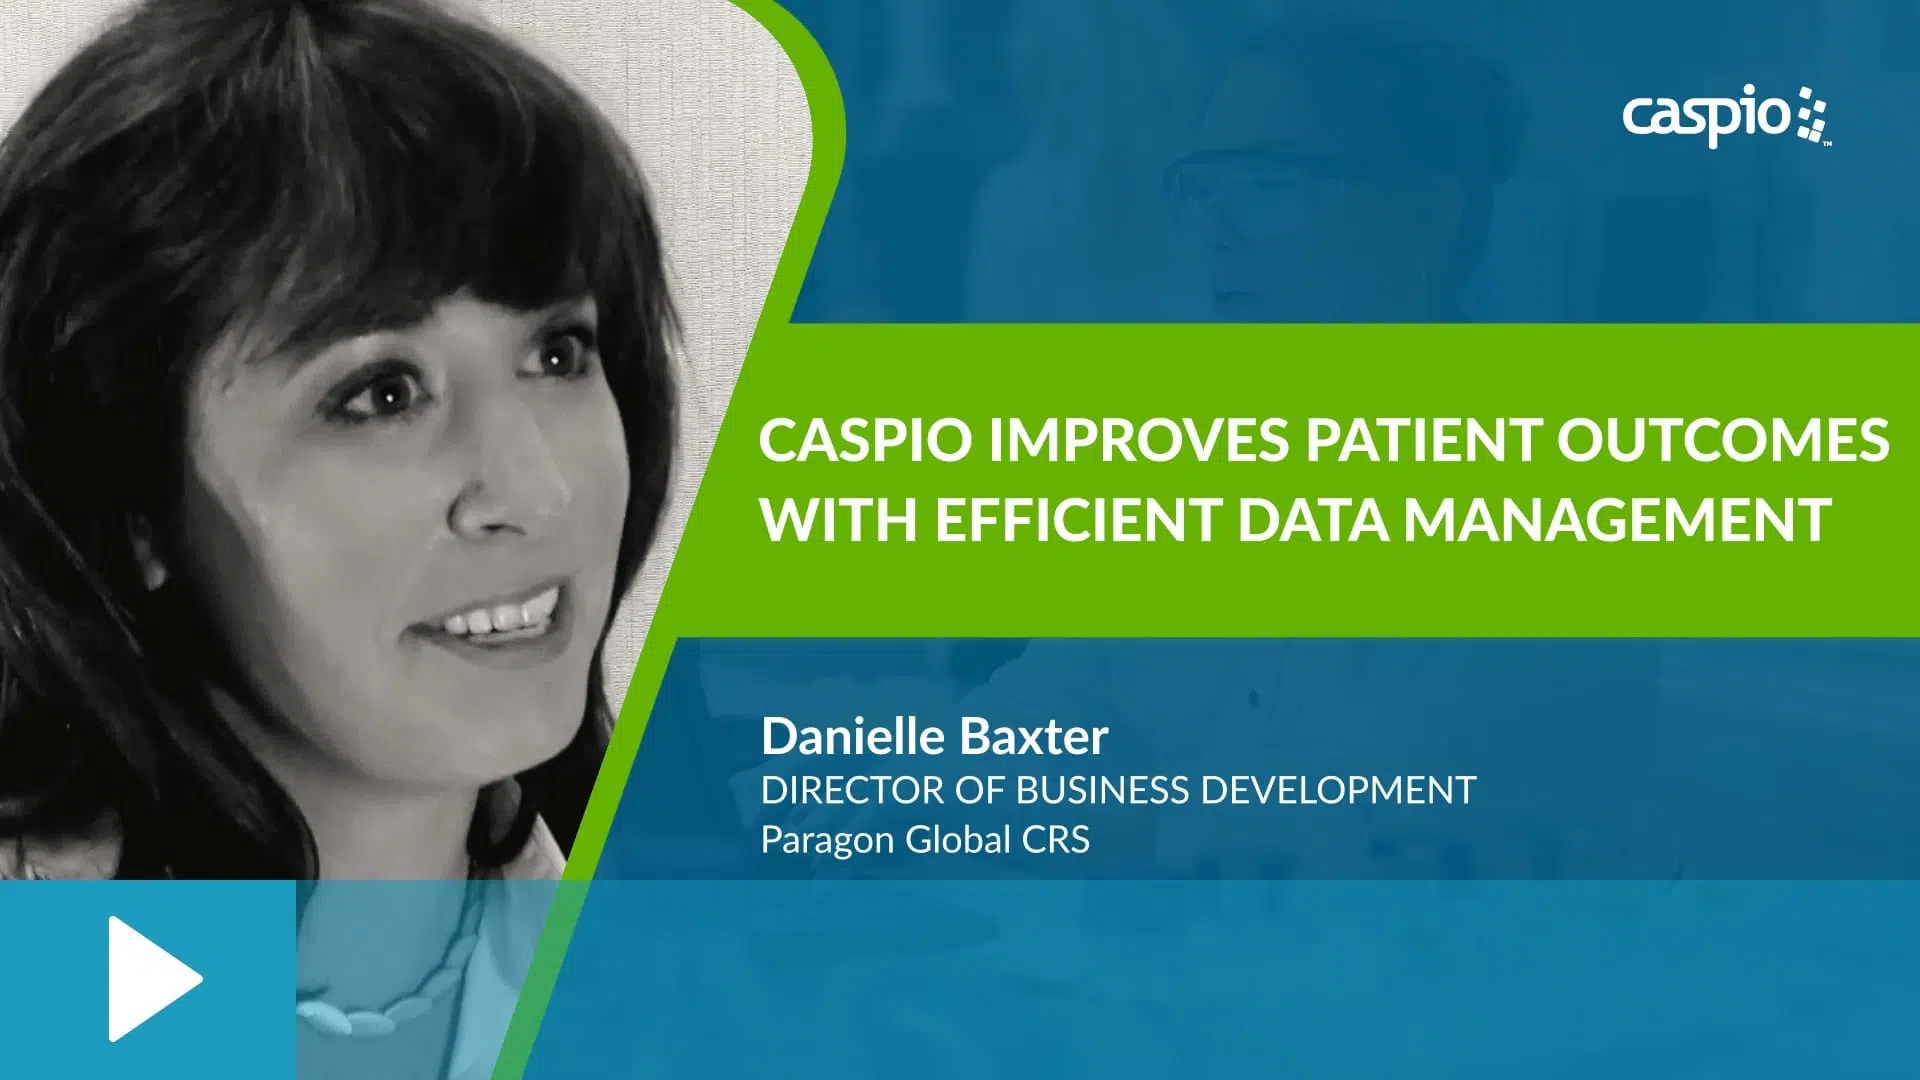 Caspio Provides Industry-Leading Features to Meet Your Unique Healthcare Management Needs